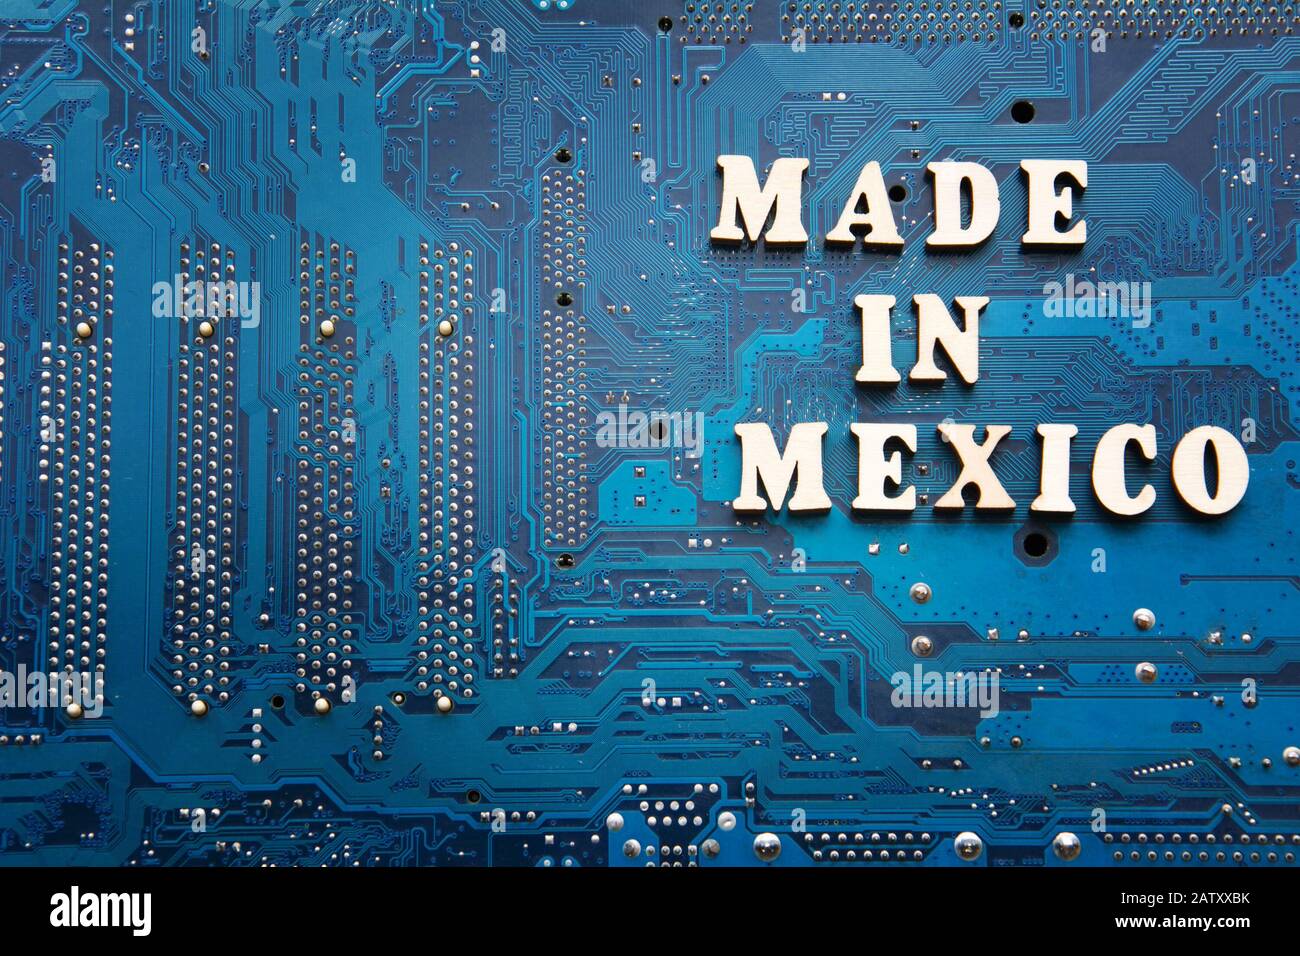 Made in Mexico. Inscription on a blue printed circuit board background. Copyspace for design Stock Photo